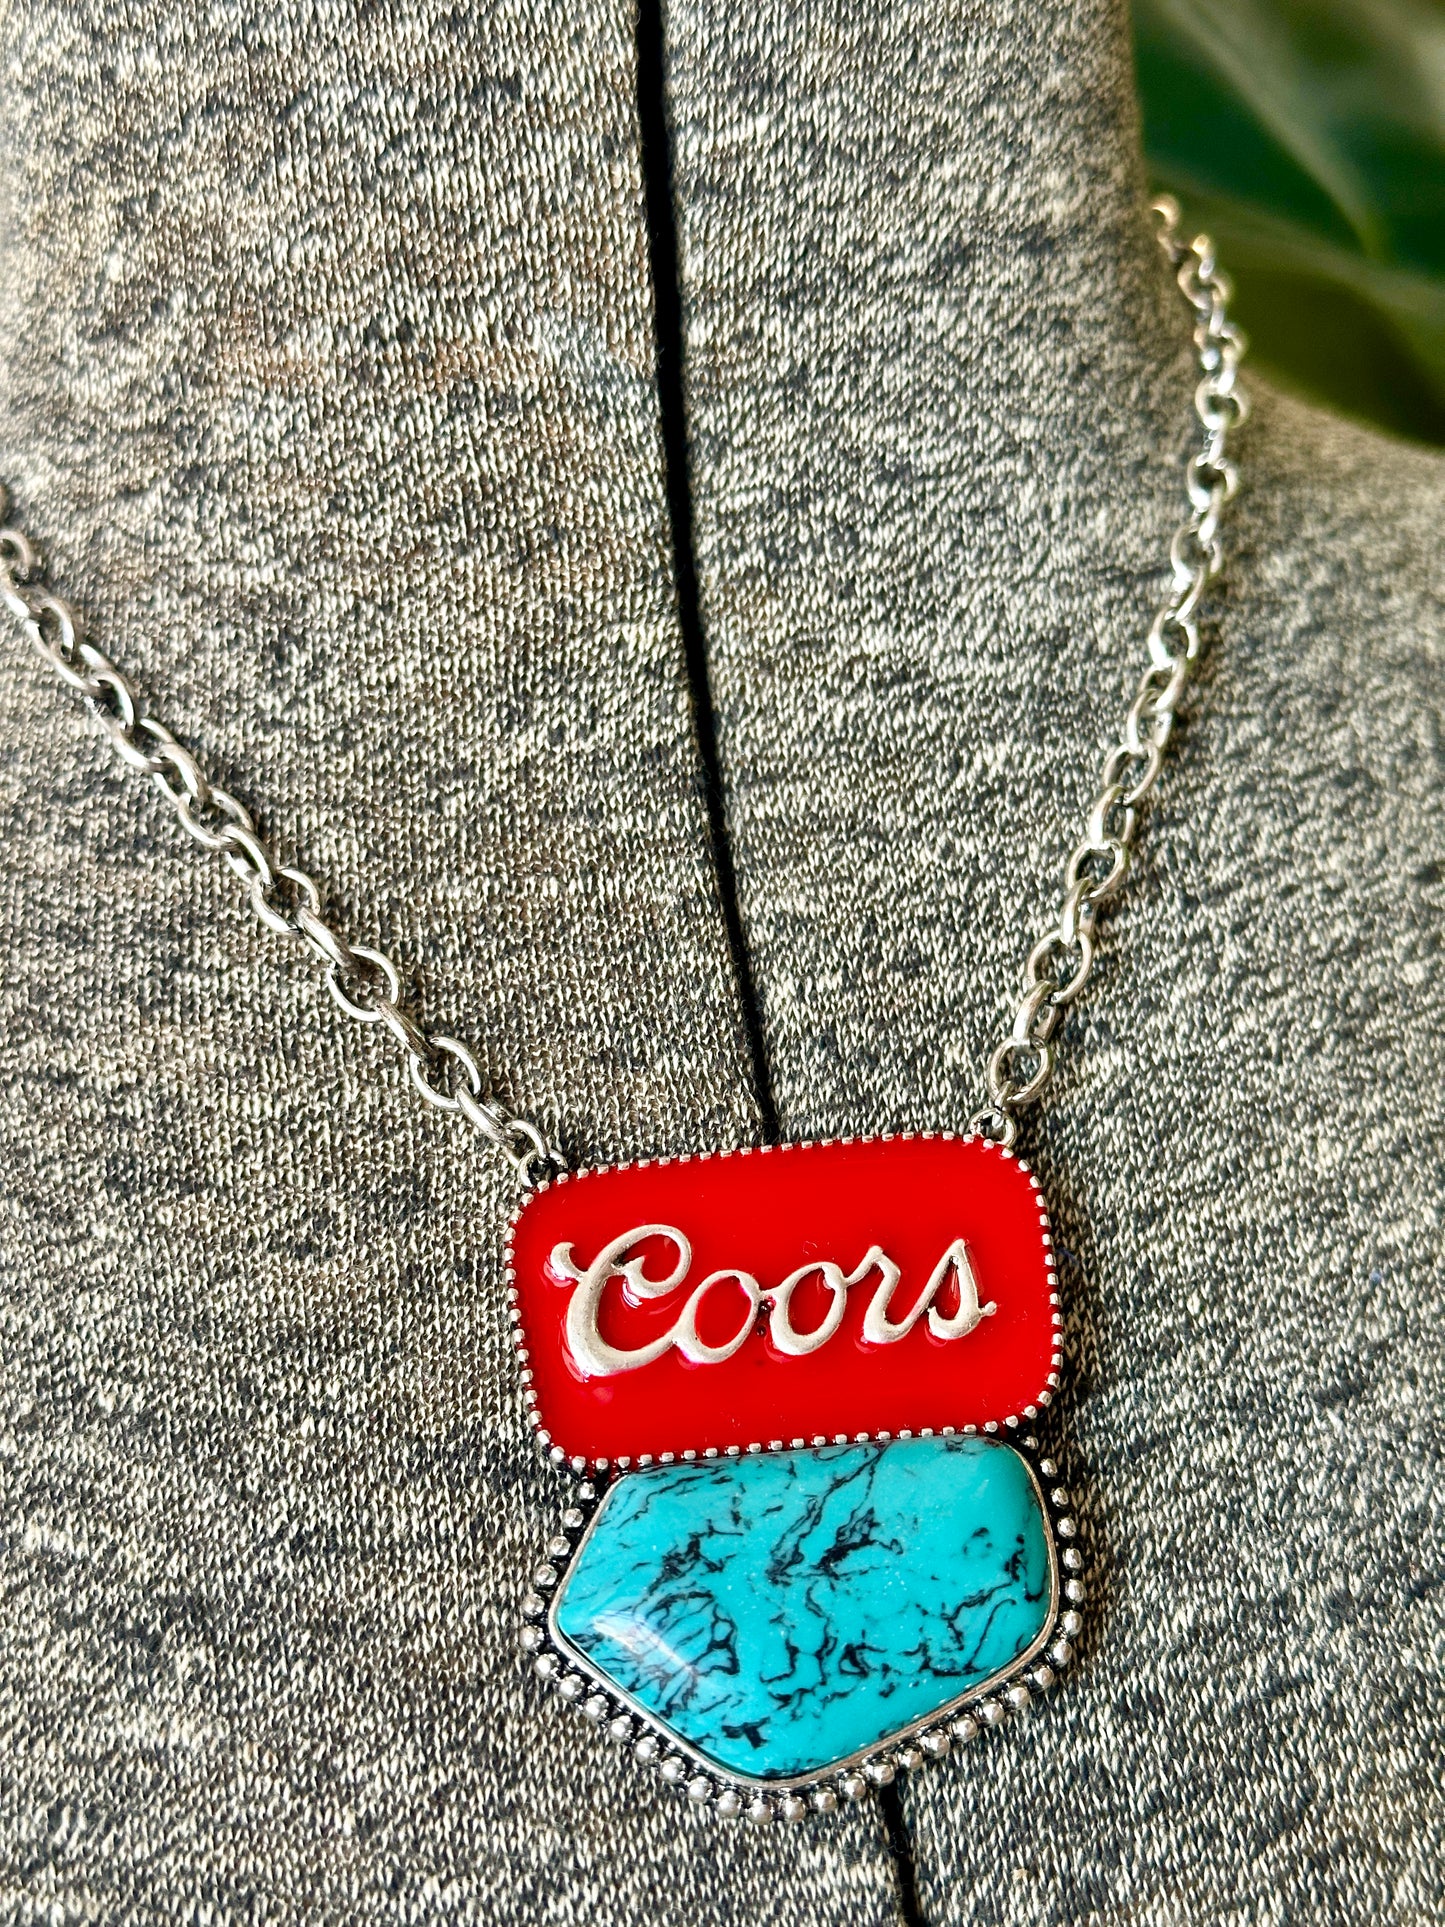 Coors Earrings & Necklace